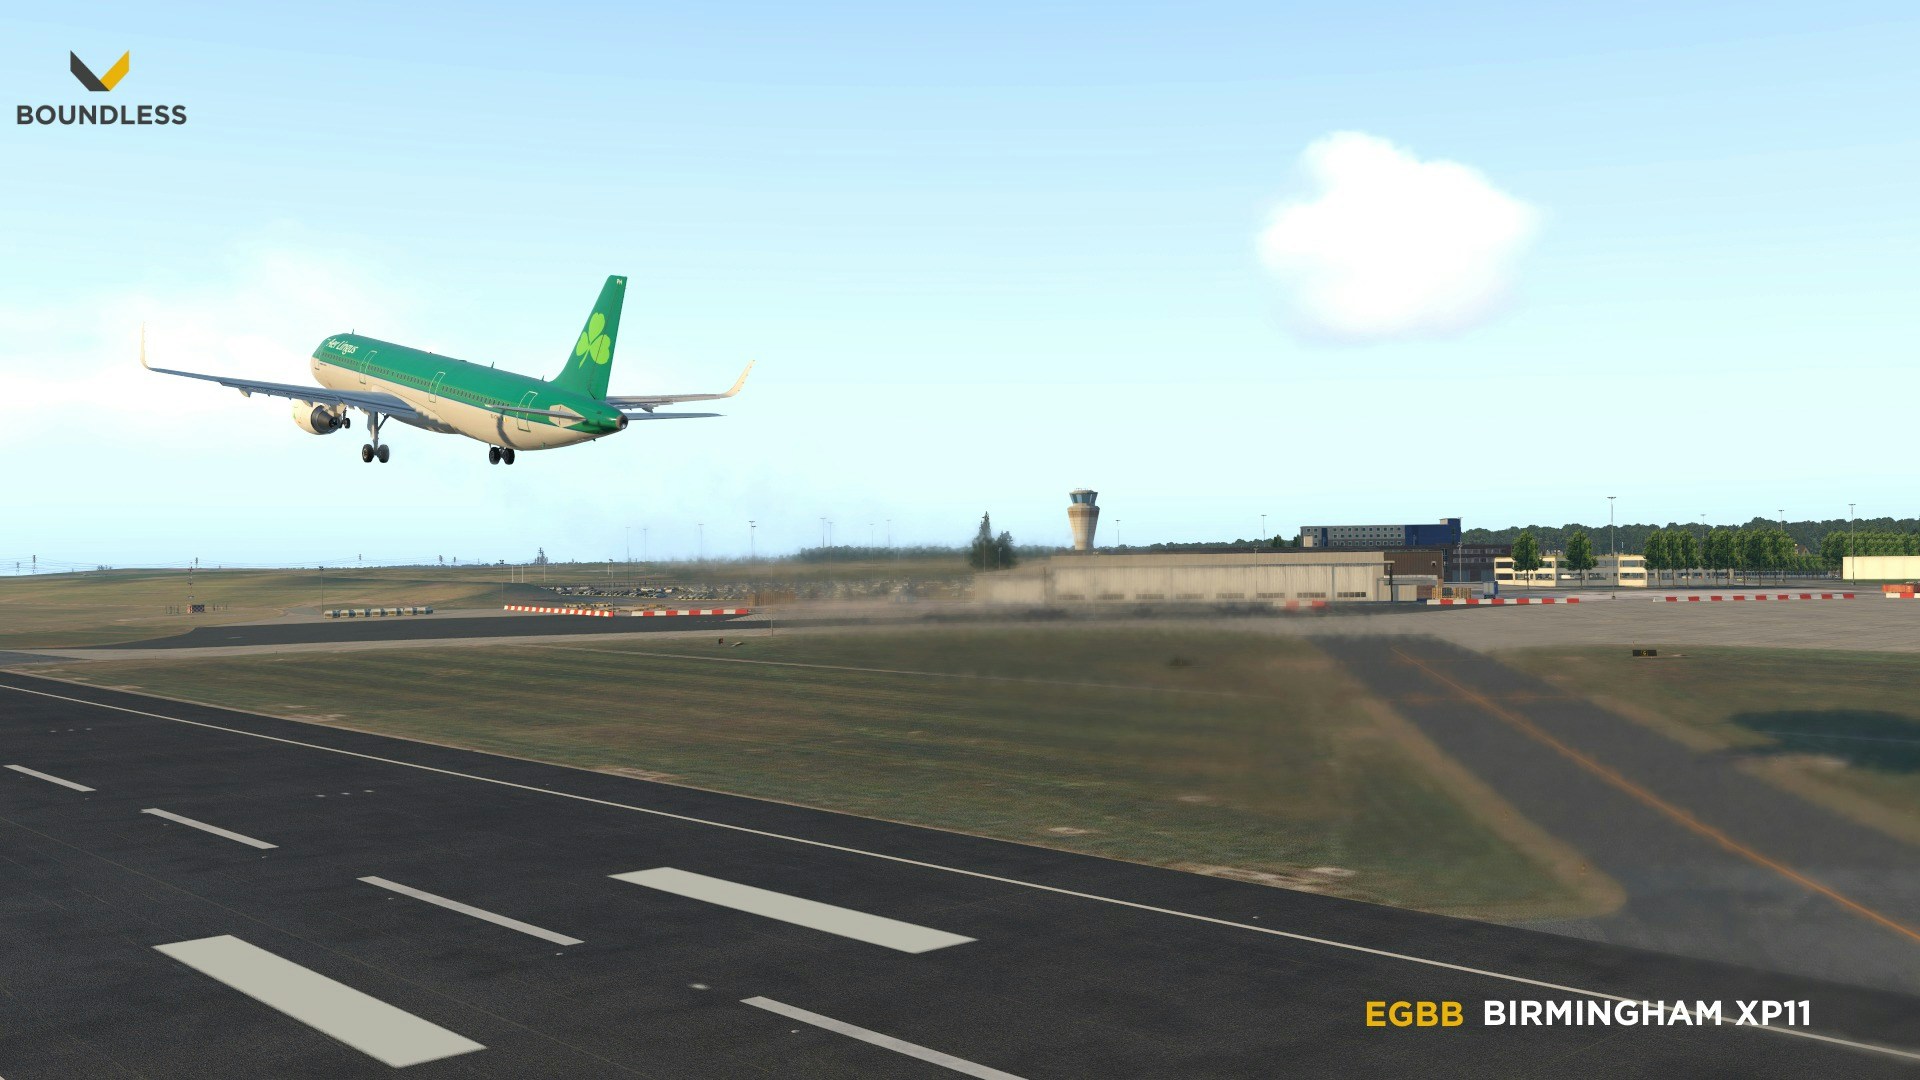 Orbx Releases 'Fun With Friends' Expansion Pack for MSFS